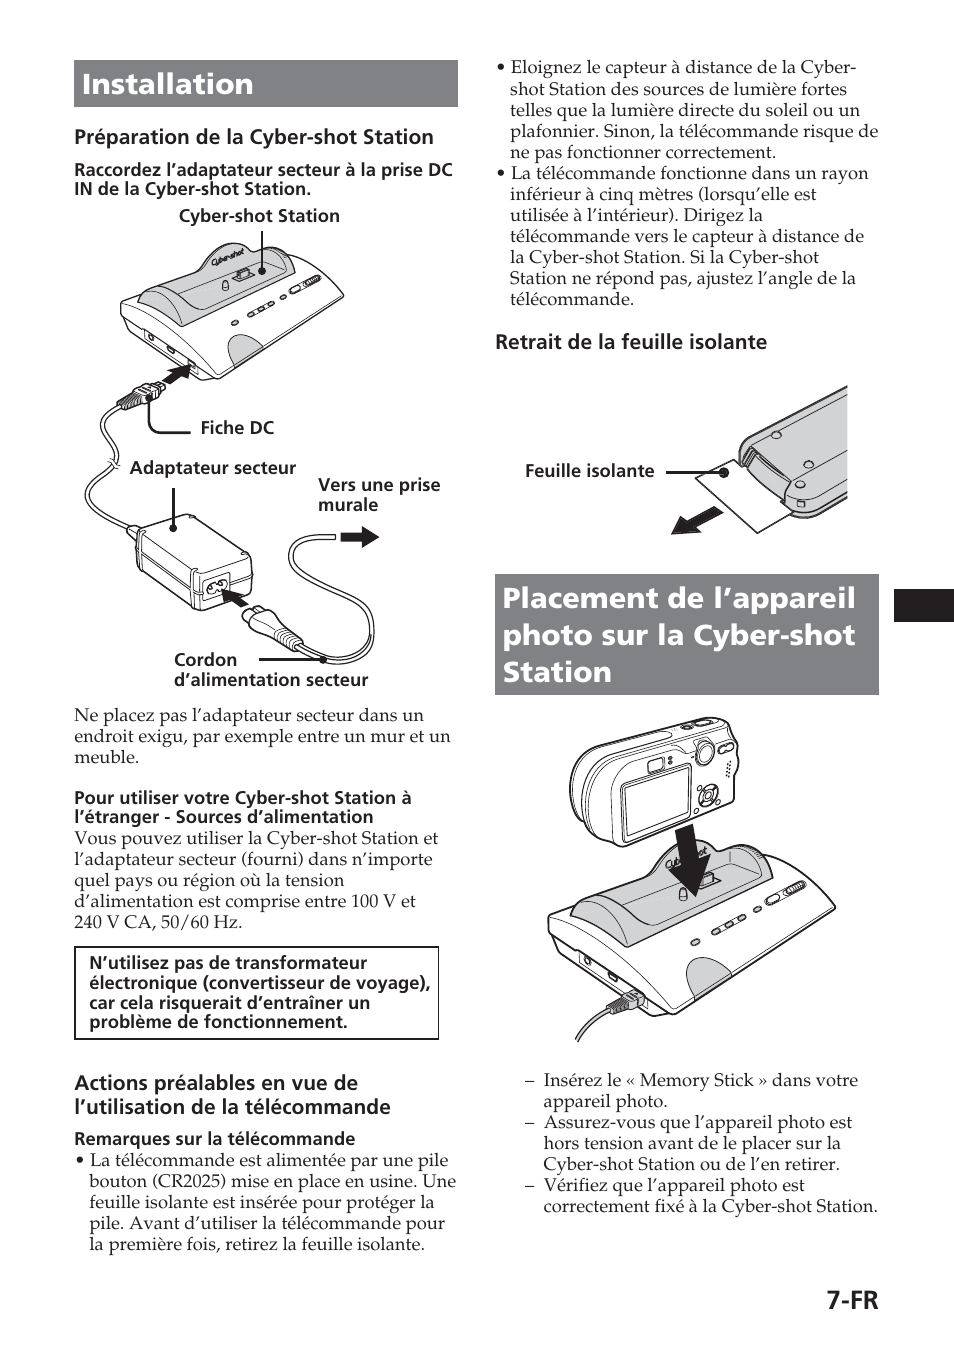 Installation | Sony Cyber-Shot Station CSS-PHB Manuel d'utilisation | Page 21 / 32